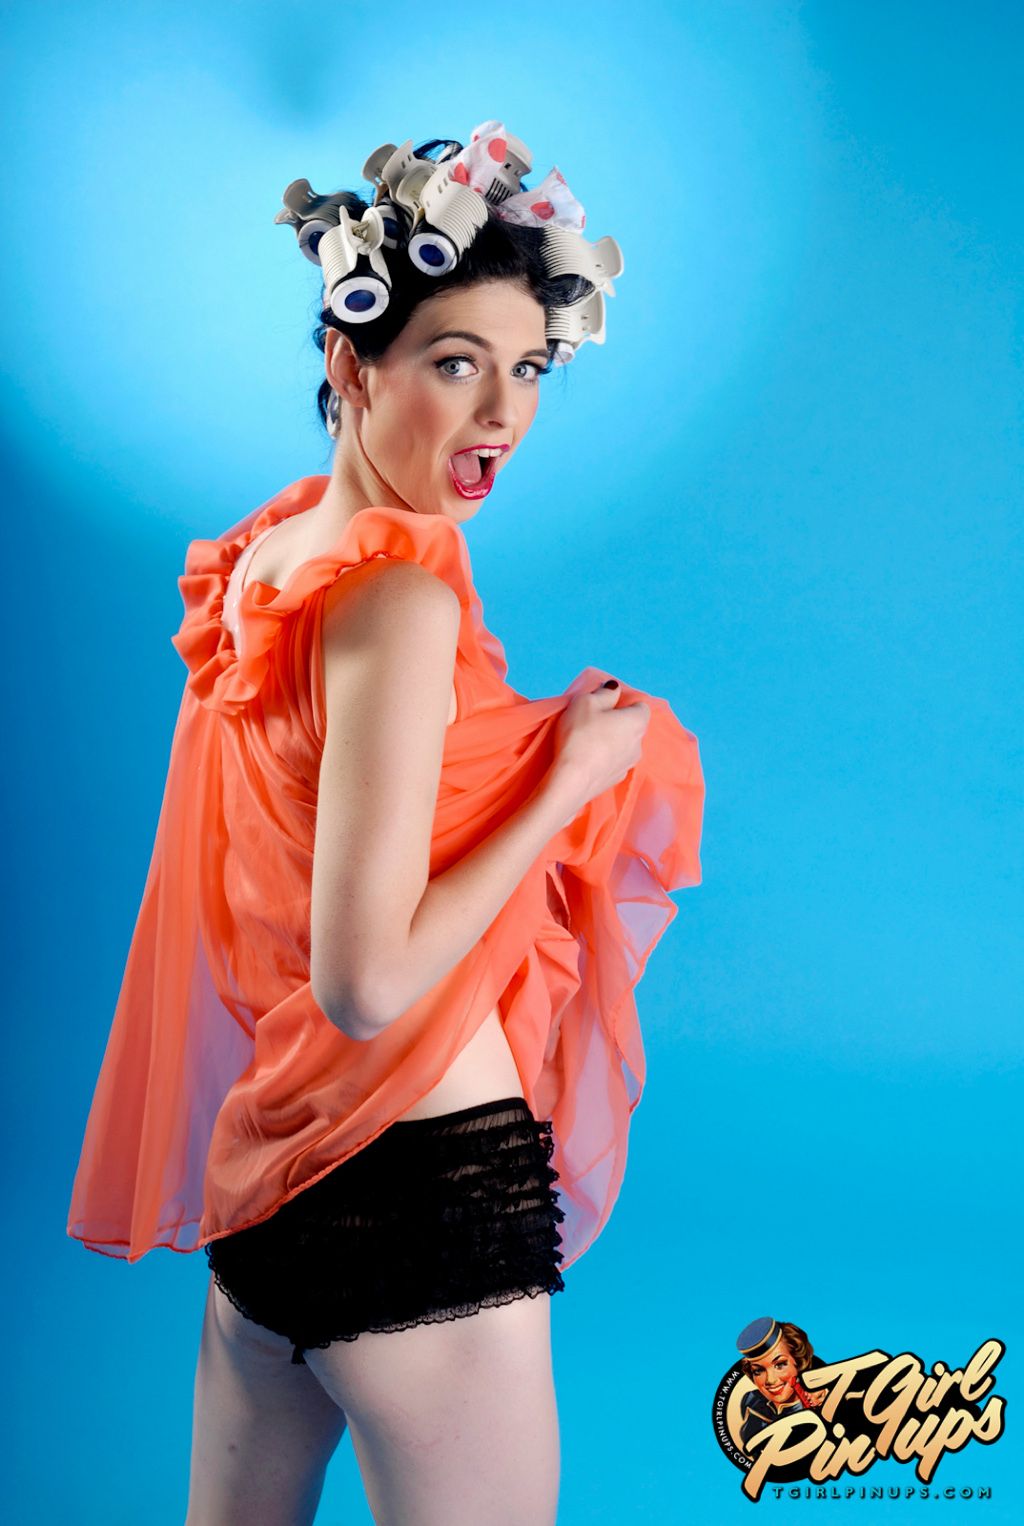 Thin transsexual Mandy Mitchell gets naked with her hair in curlers for a retro shoot TRANS.pics picture